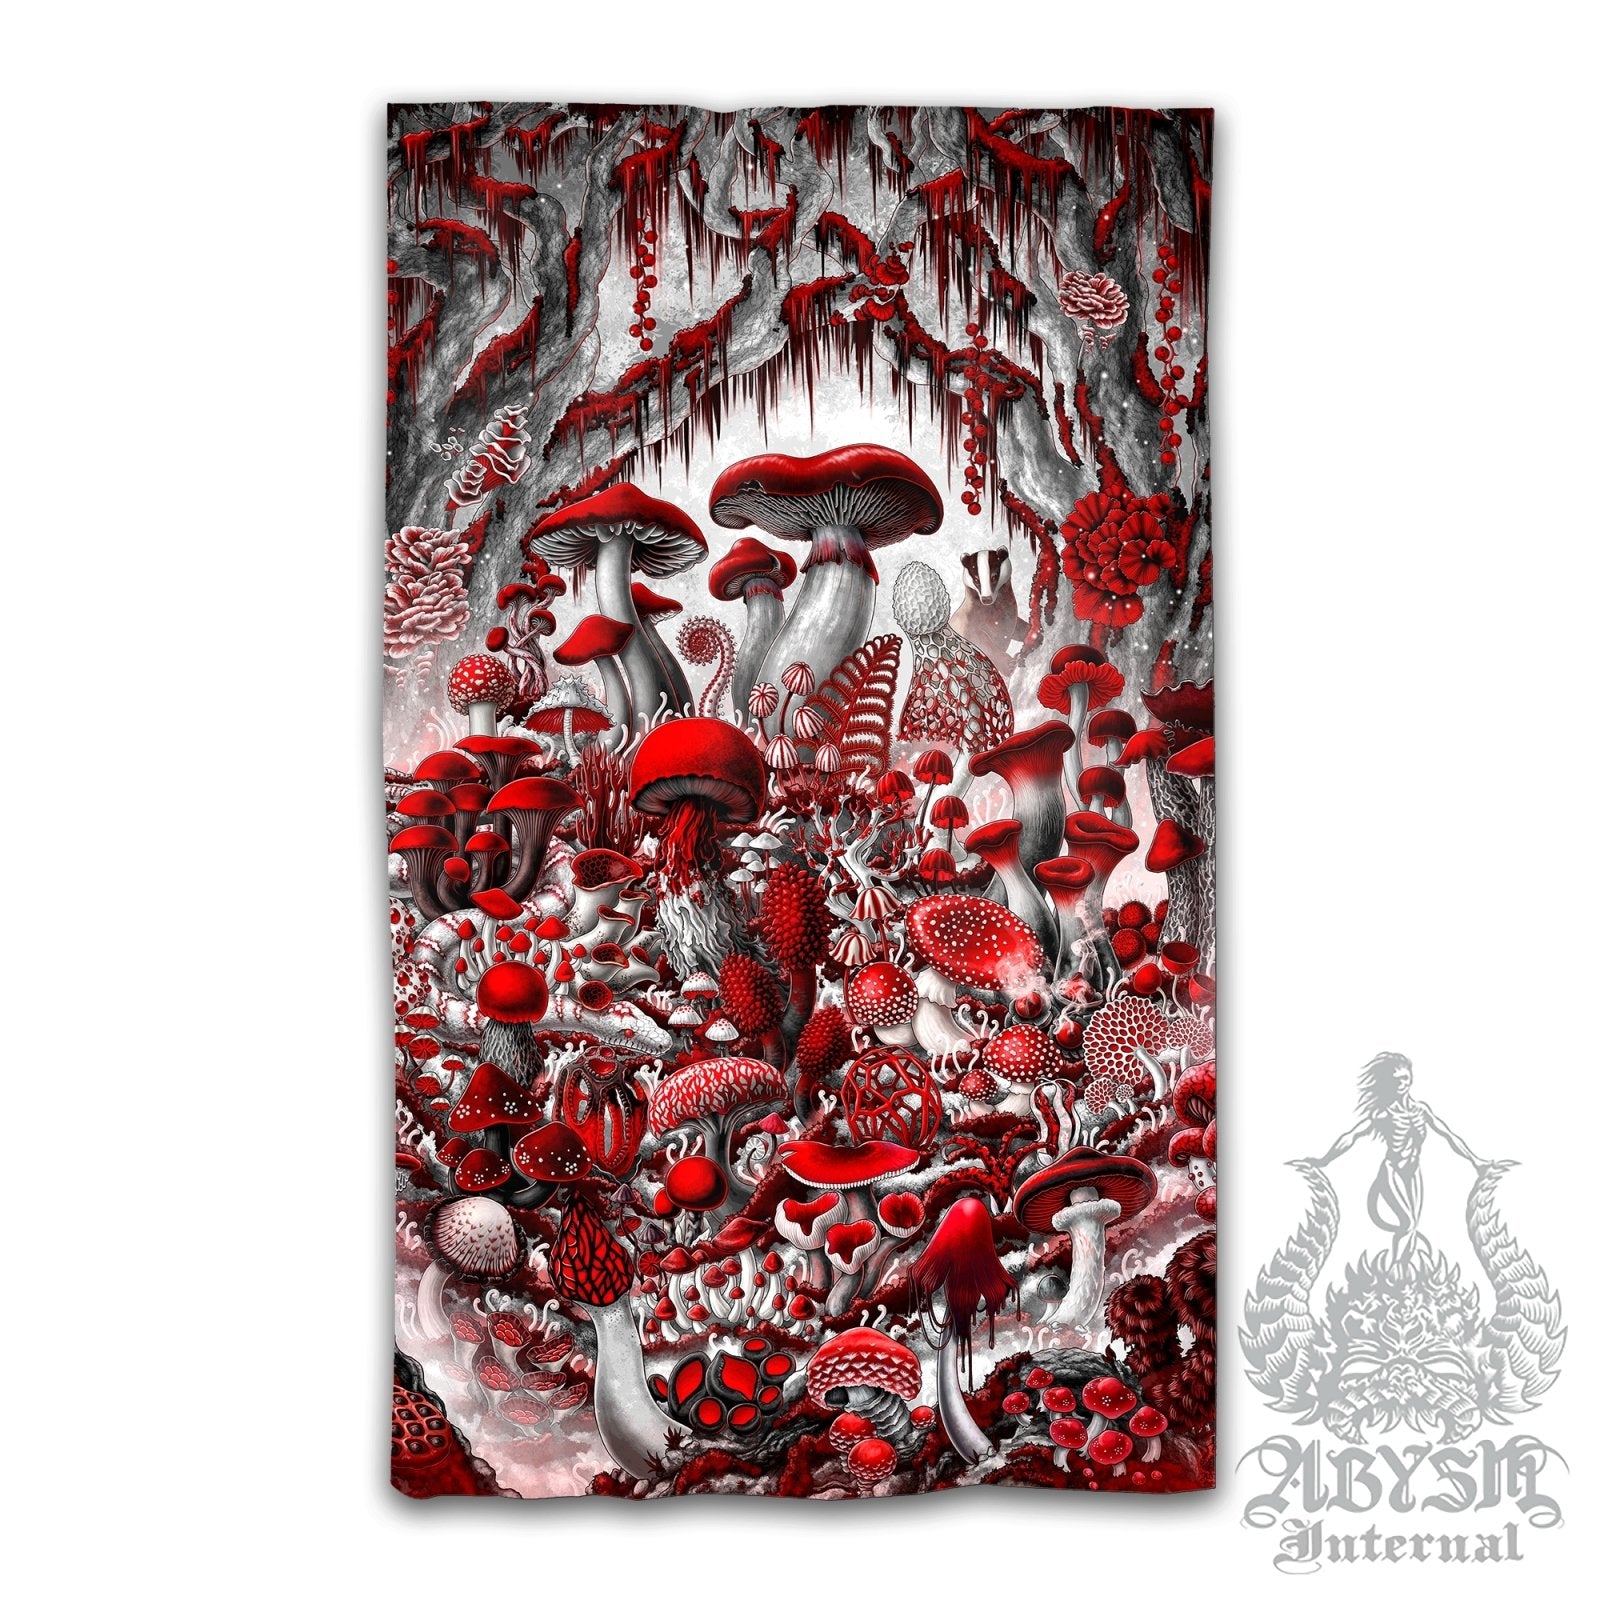 Gothic Mushrooms Blackout Curtains, Long Window Panels, Indie Art Print, Home and Room Decor - Magic Shrooms, Bloody White Goth - Abysm Internal